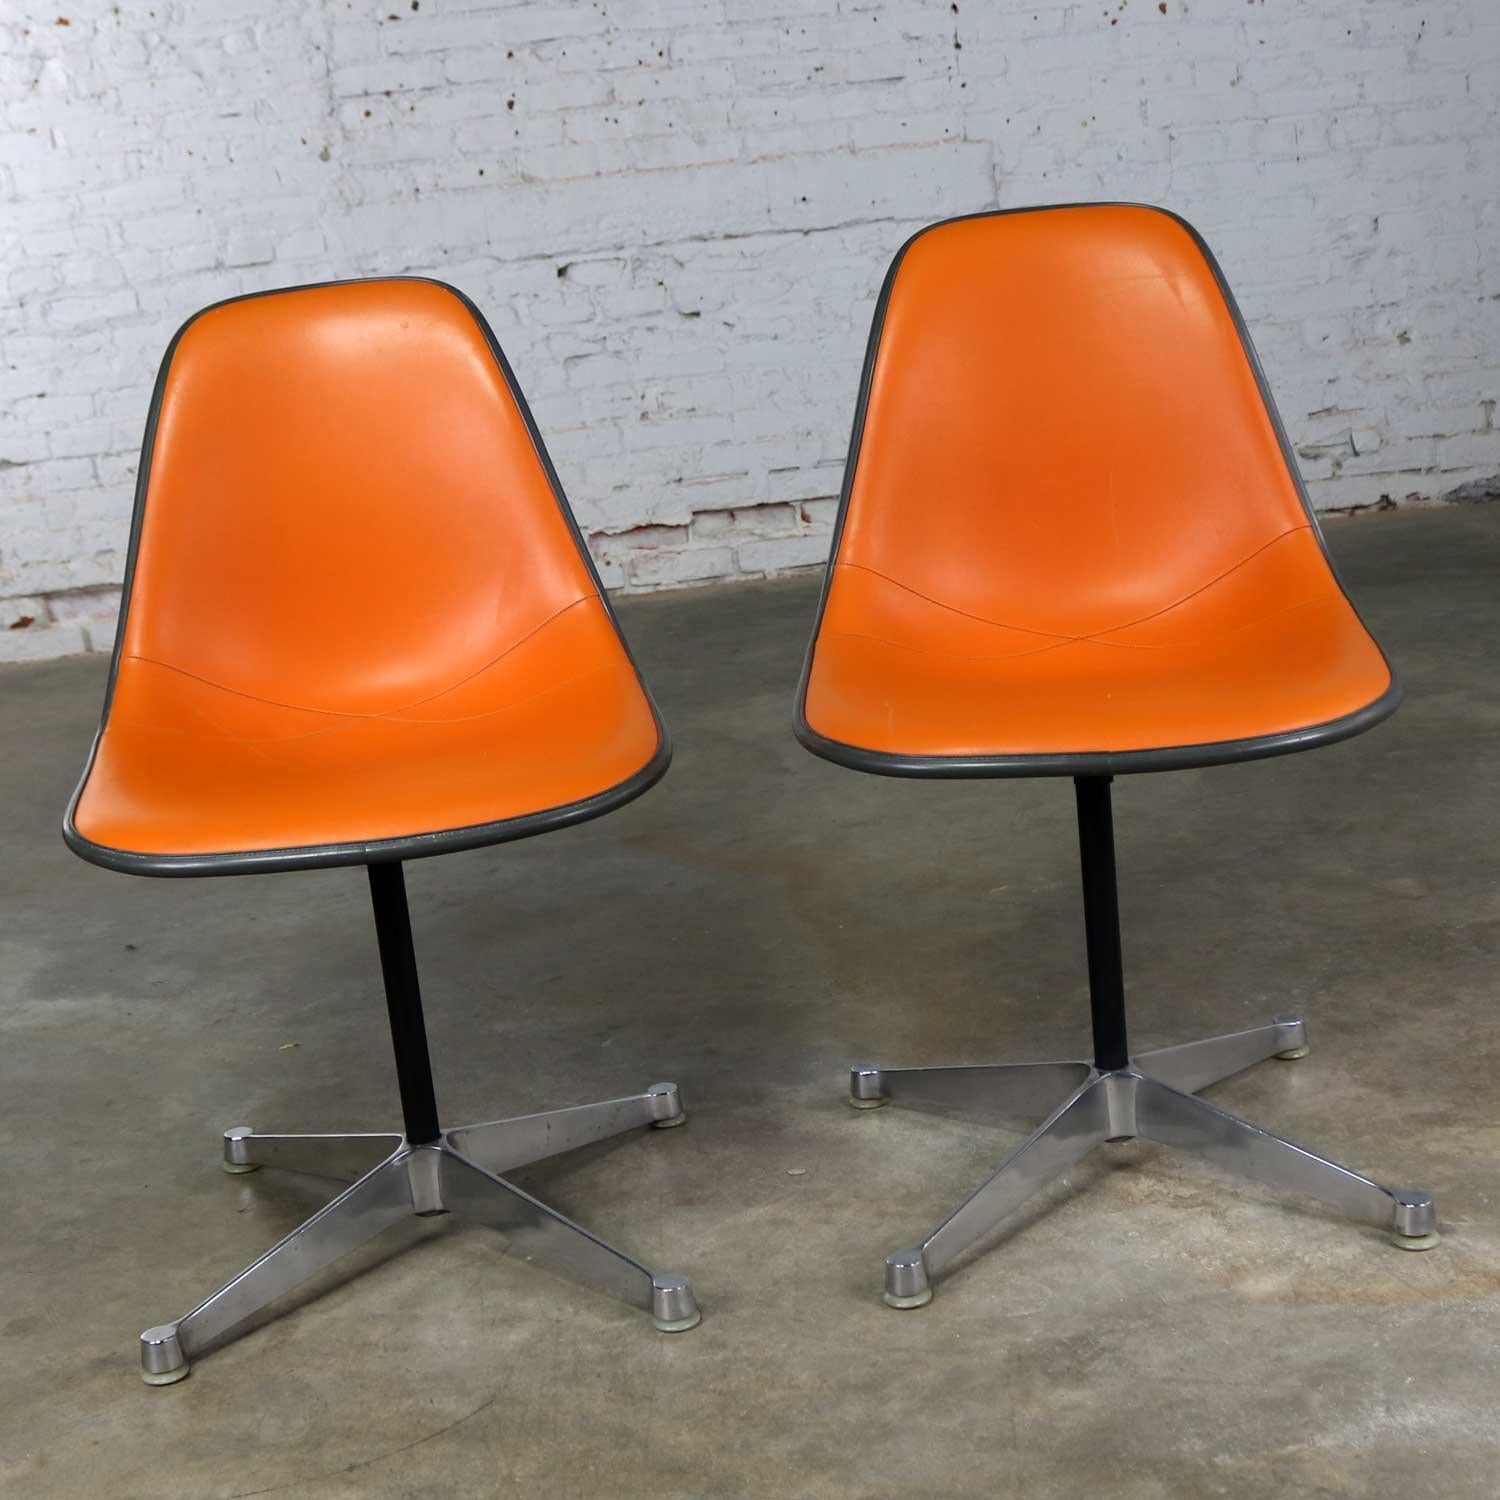 Fabulous pair of Herman Miller Eames pivoting side shell chairs on contract base or PSC chair. Their greige fiberglass shells are upholstered in orange vinyl. They are in wonderful vintage condition with only the normal wear for their age. There is